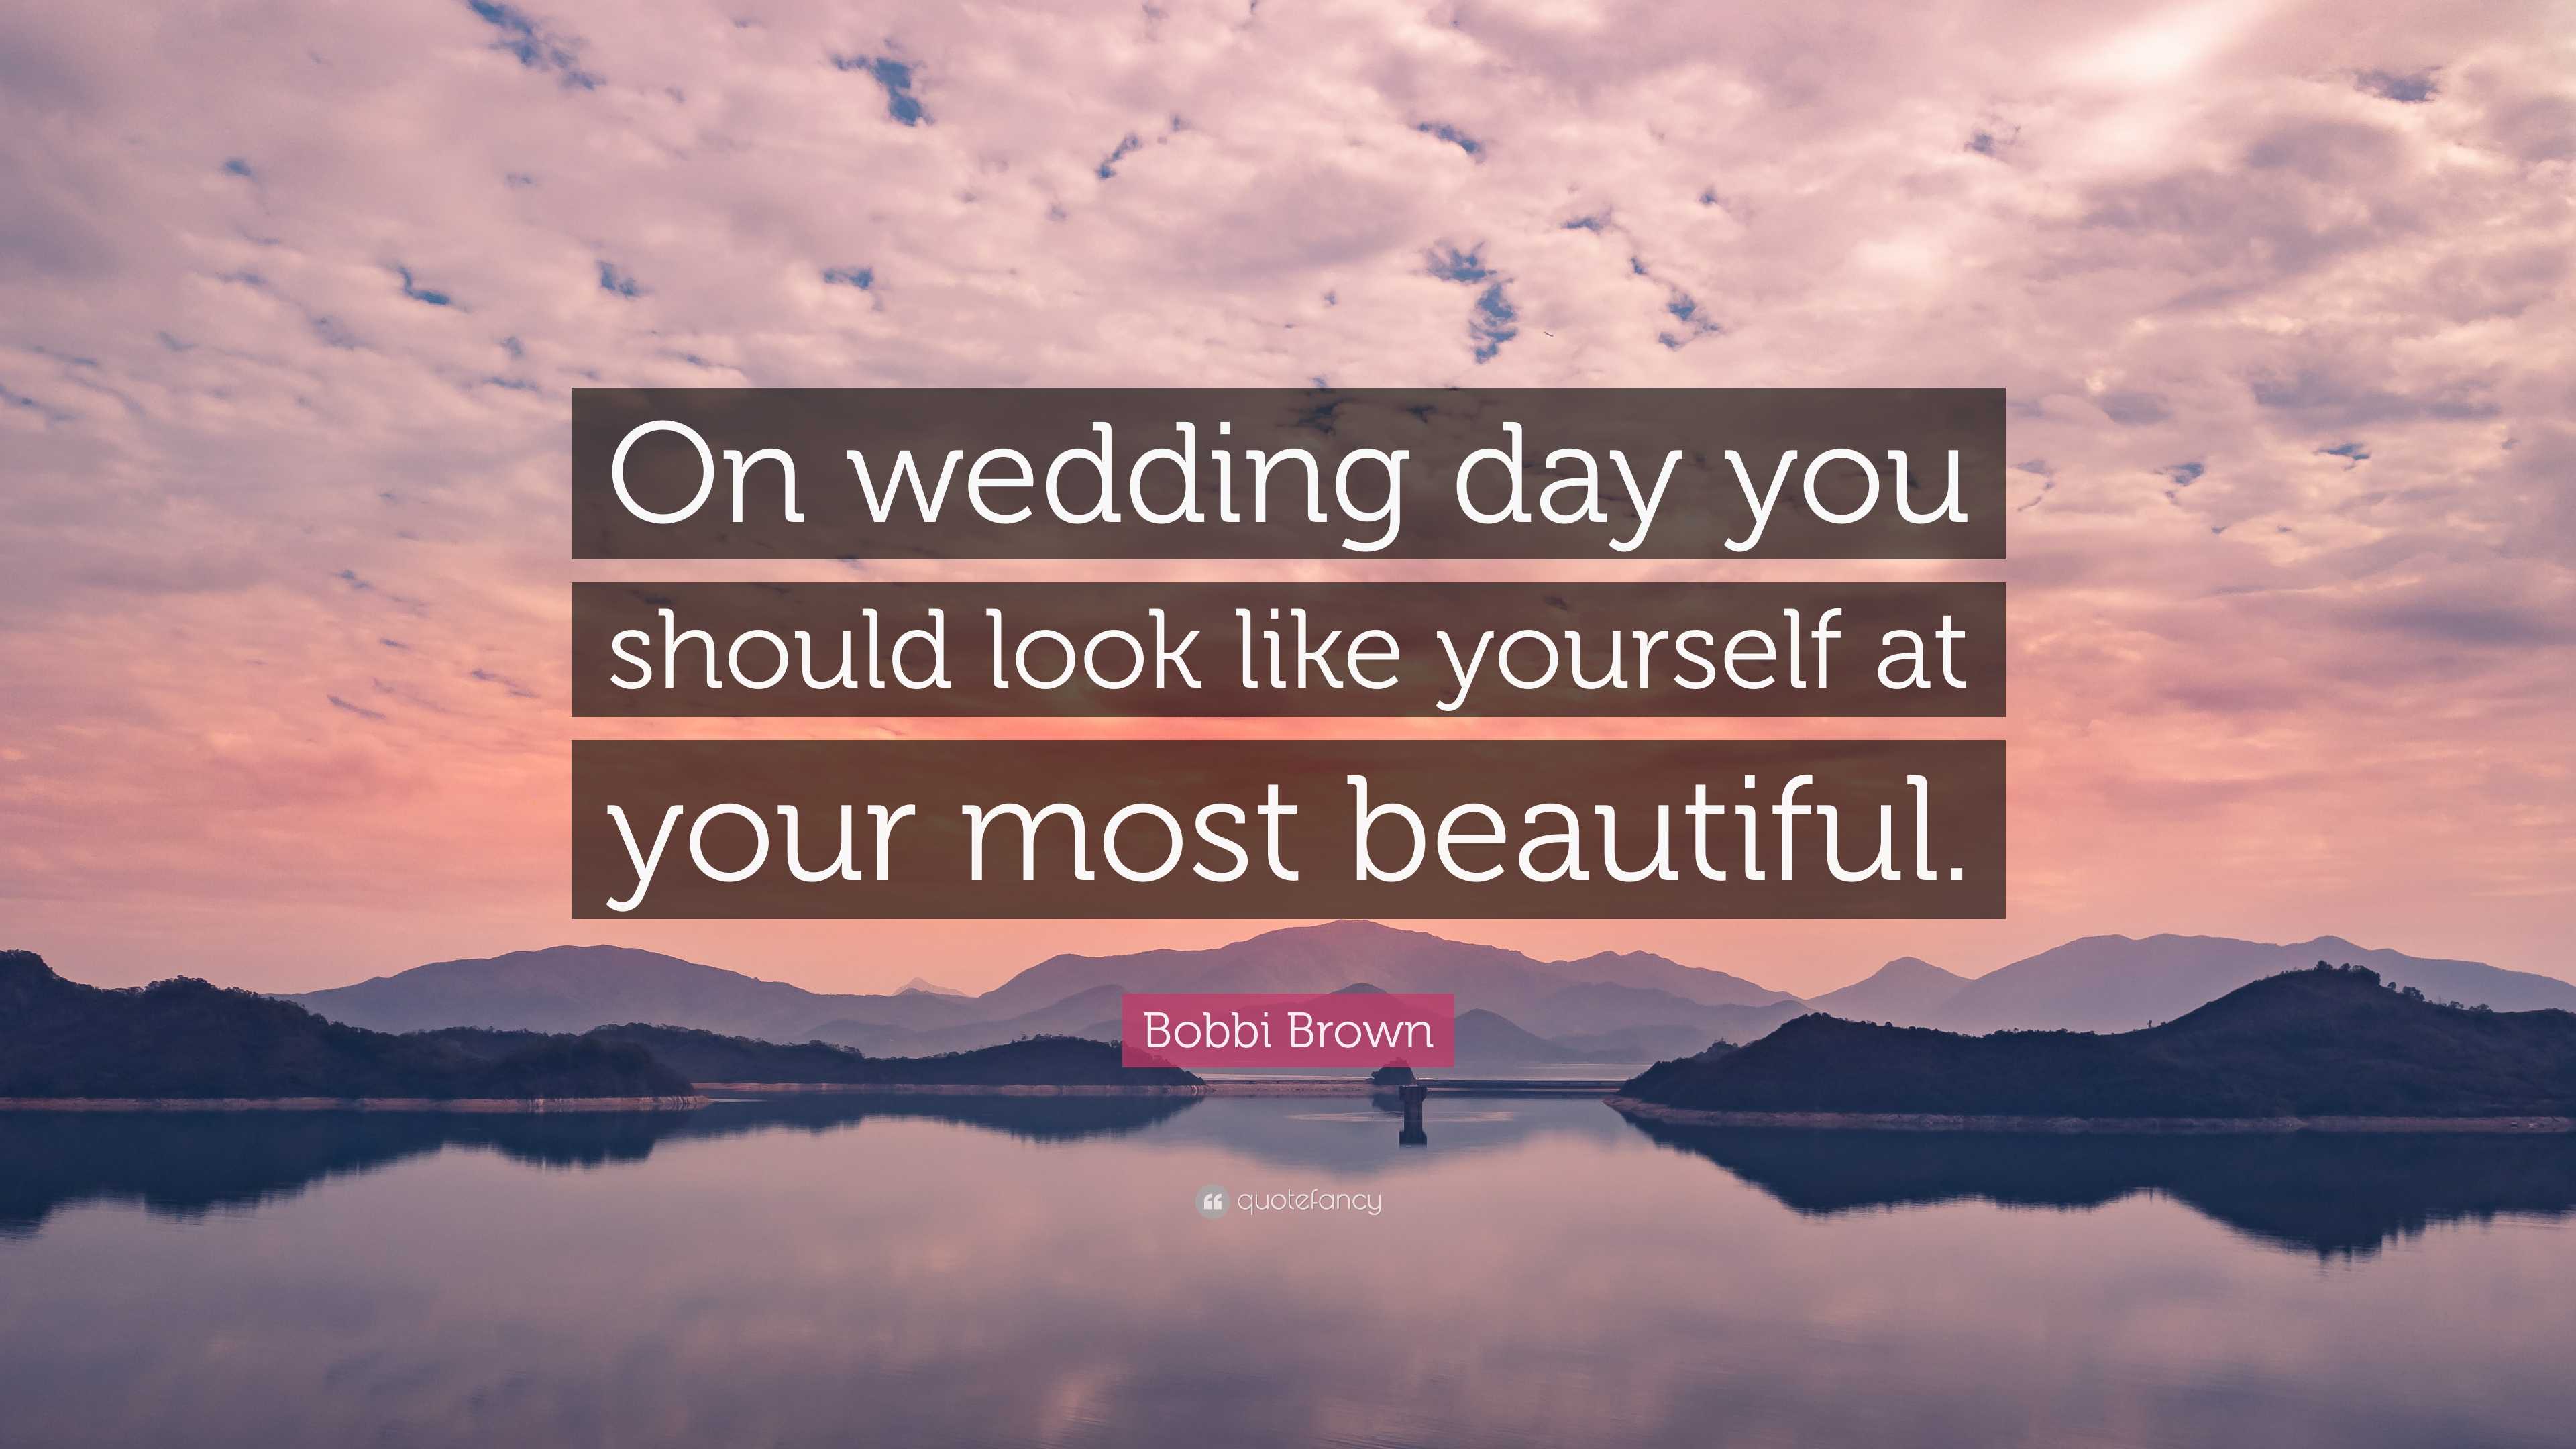 Bobbi Brown Quote: “On wedding day you should look like yourself at your  most beautiful.”